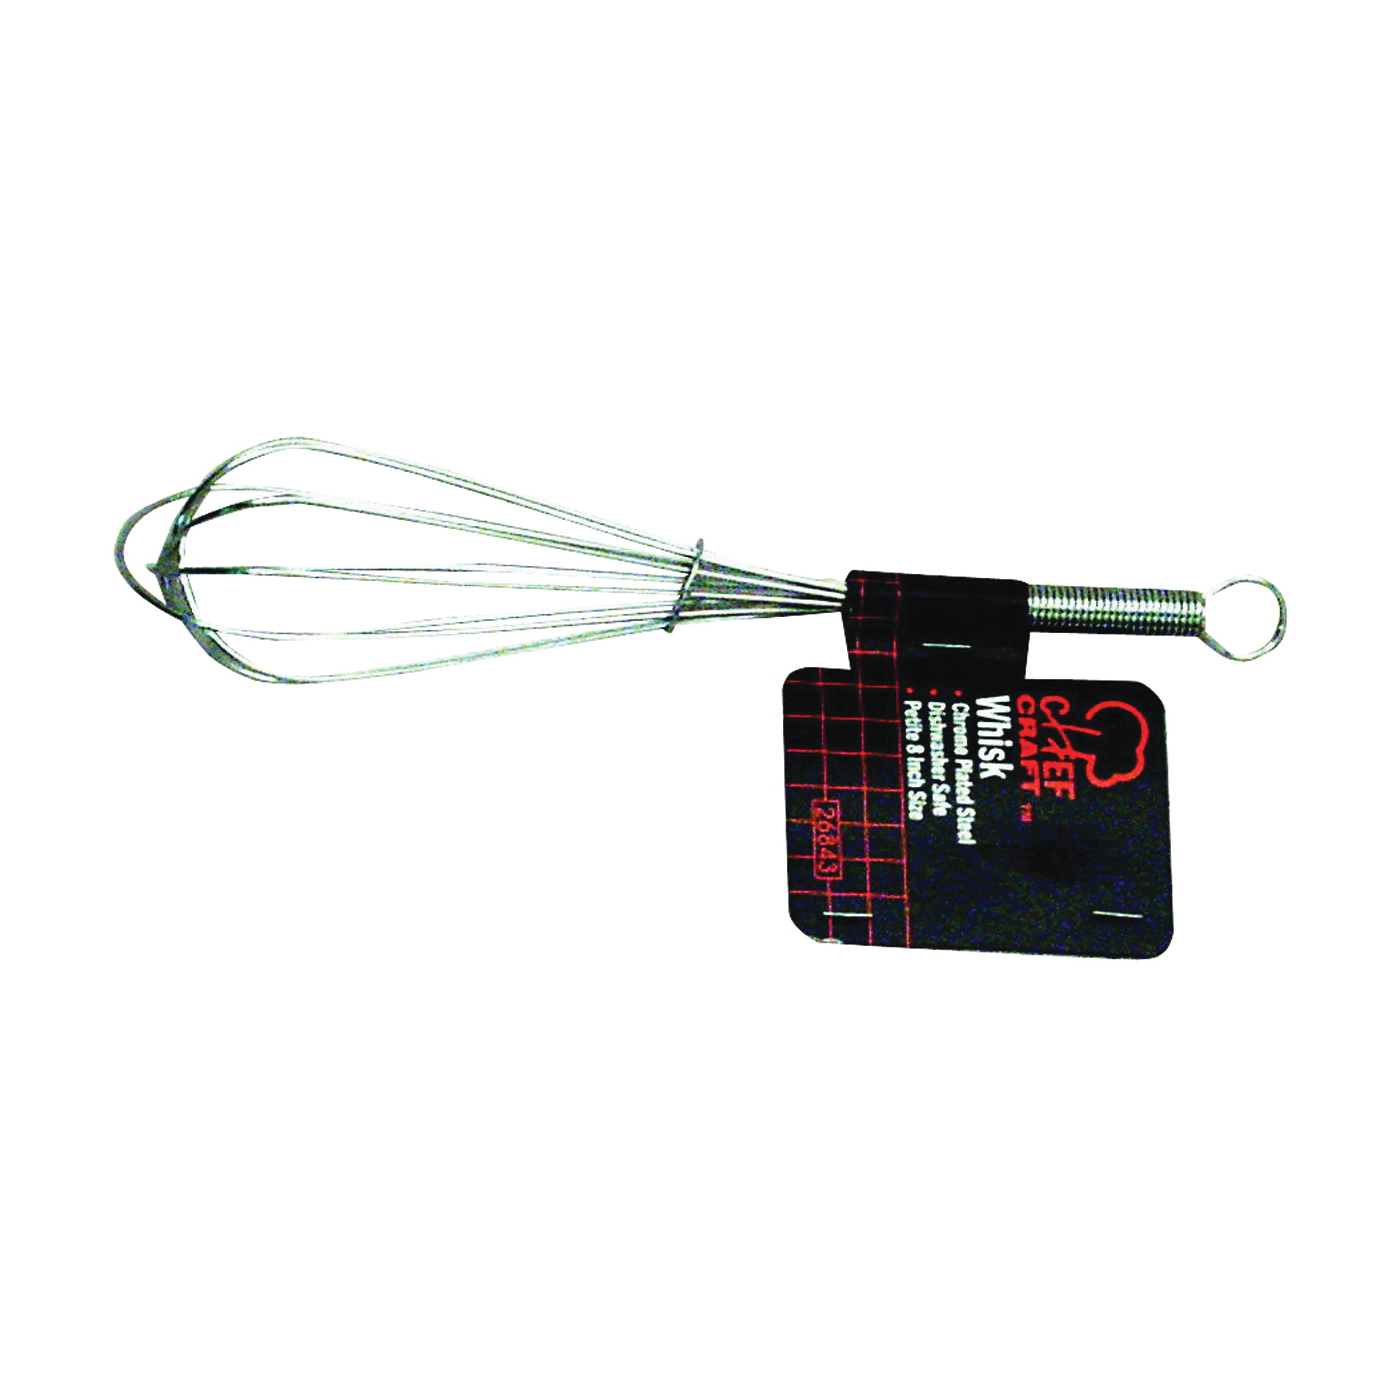 26710 Compact Whisk, 8 in OAL, Stainless Steel, Stainless Steel Handle